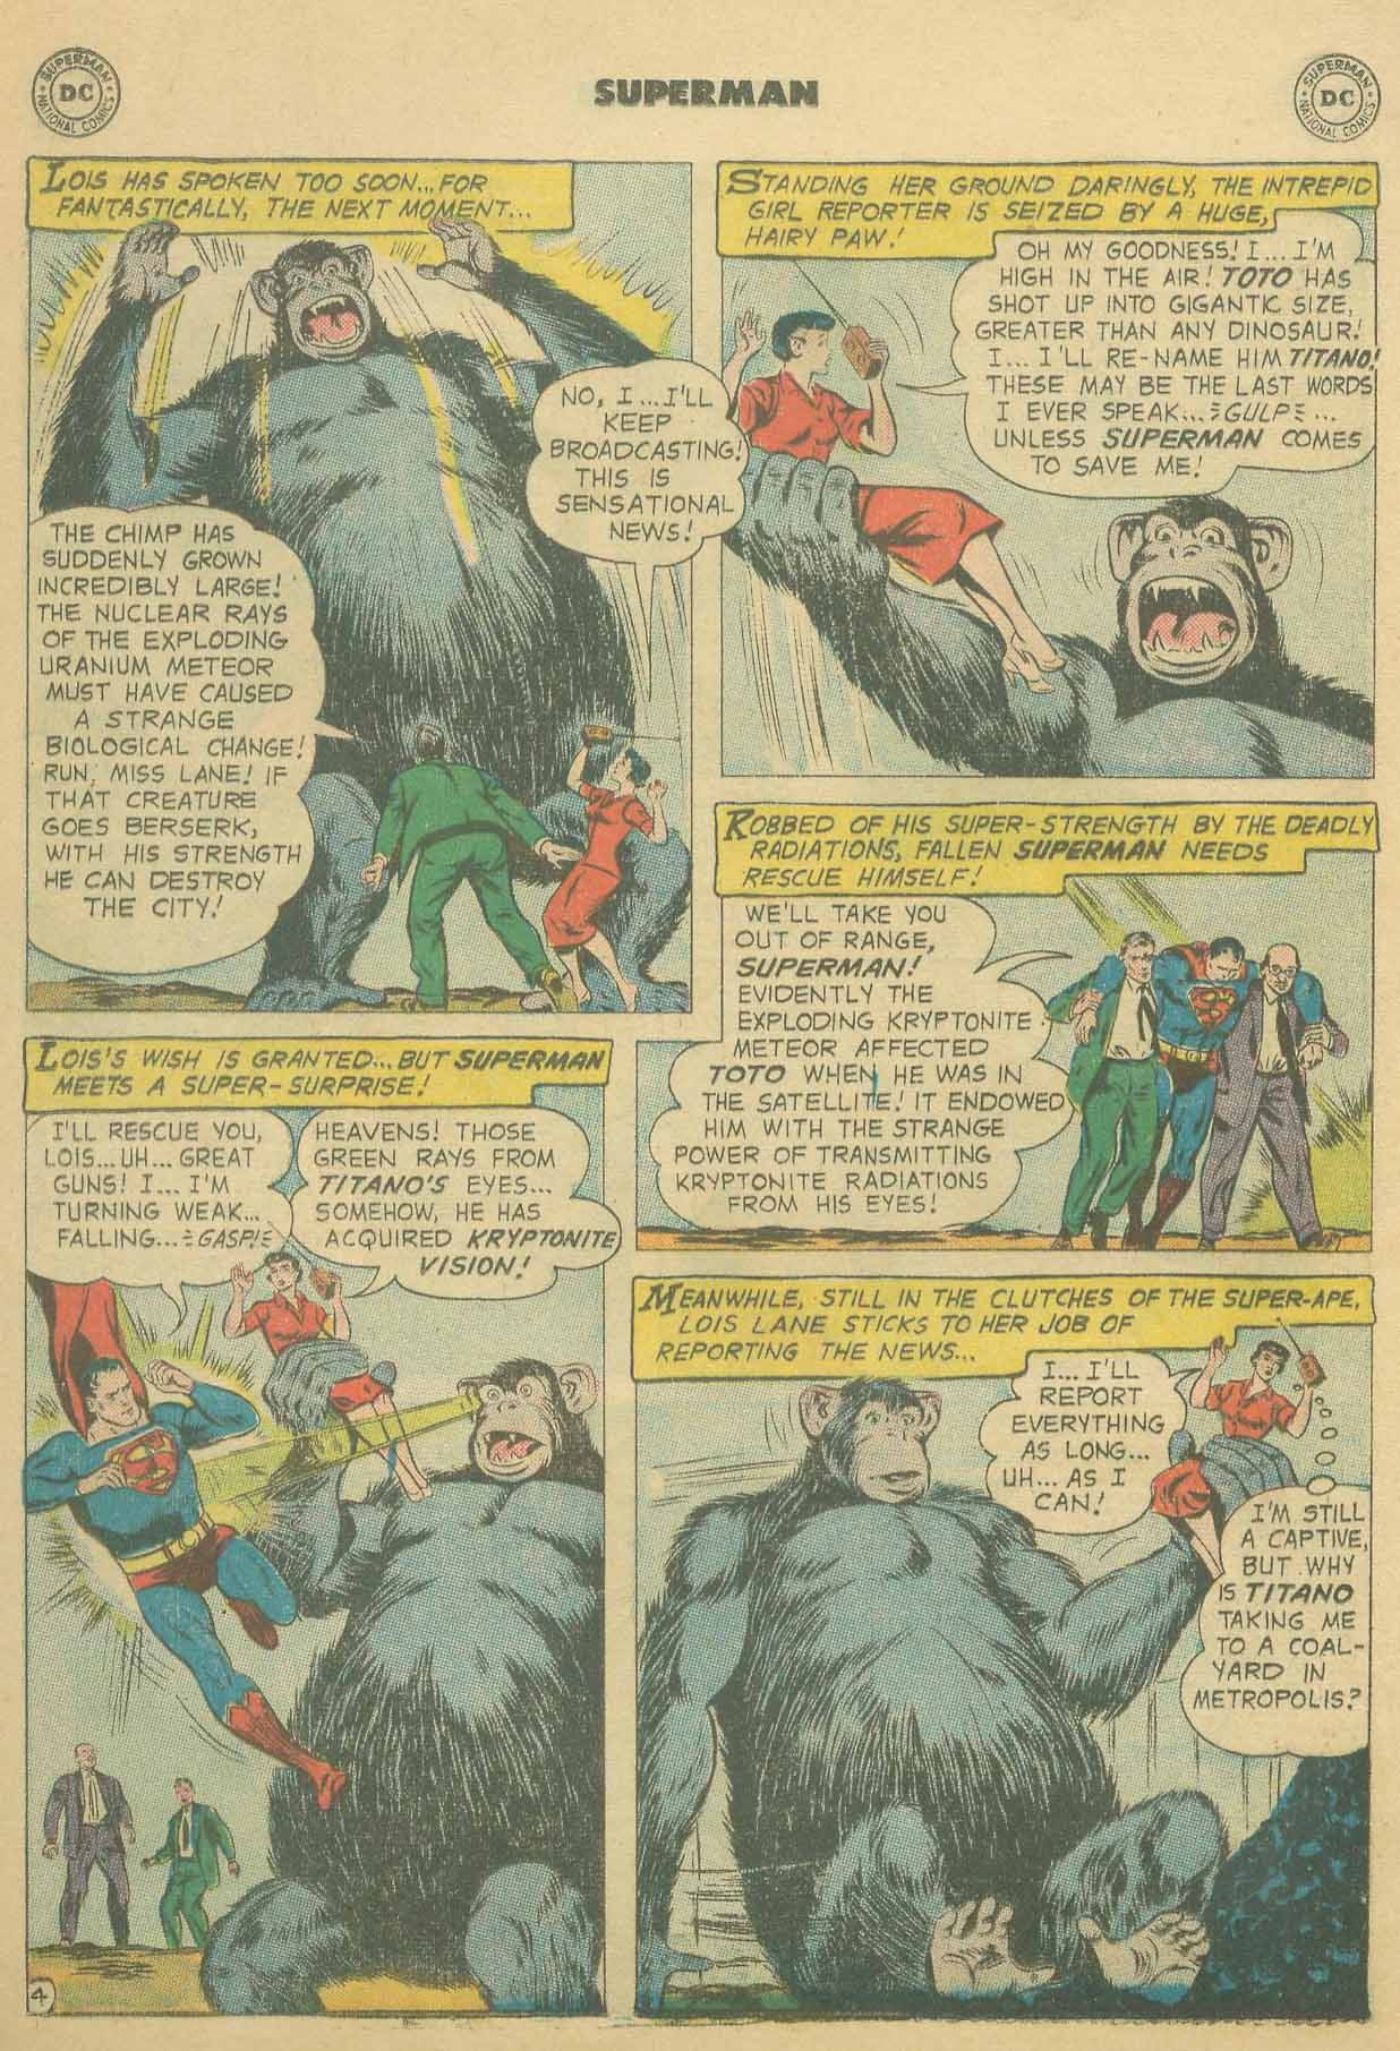 Great Ape Titano kidnaps Lois and punches Superman.